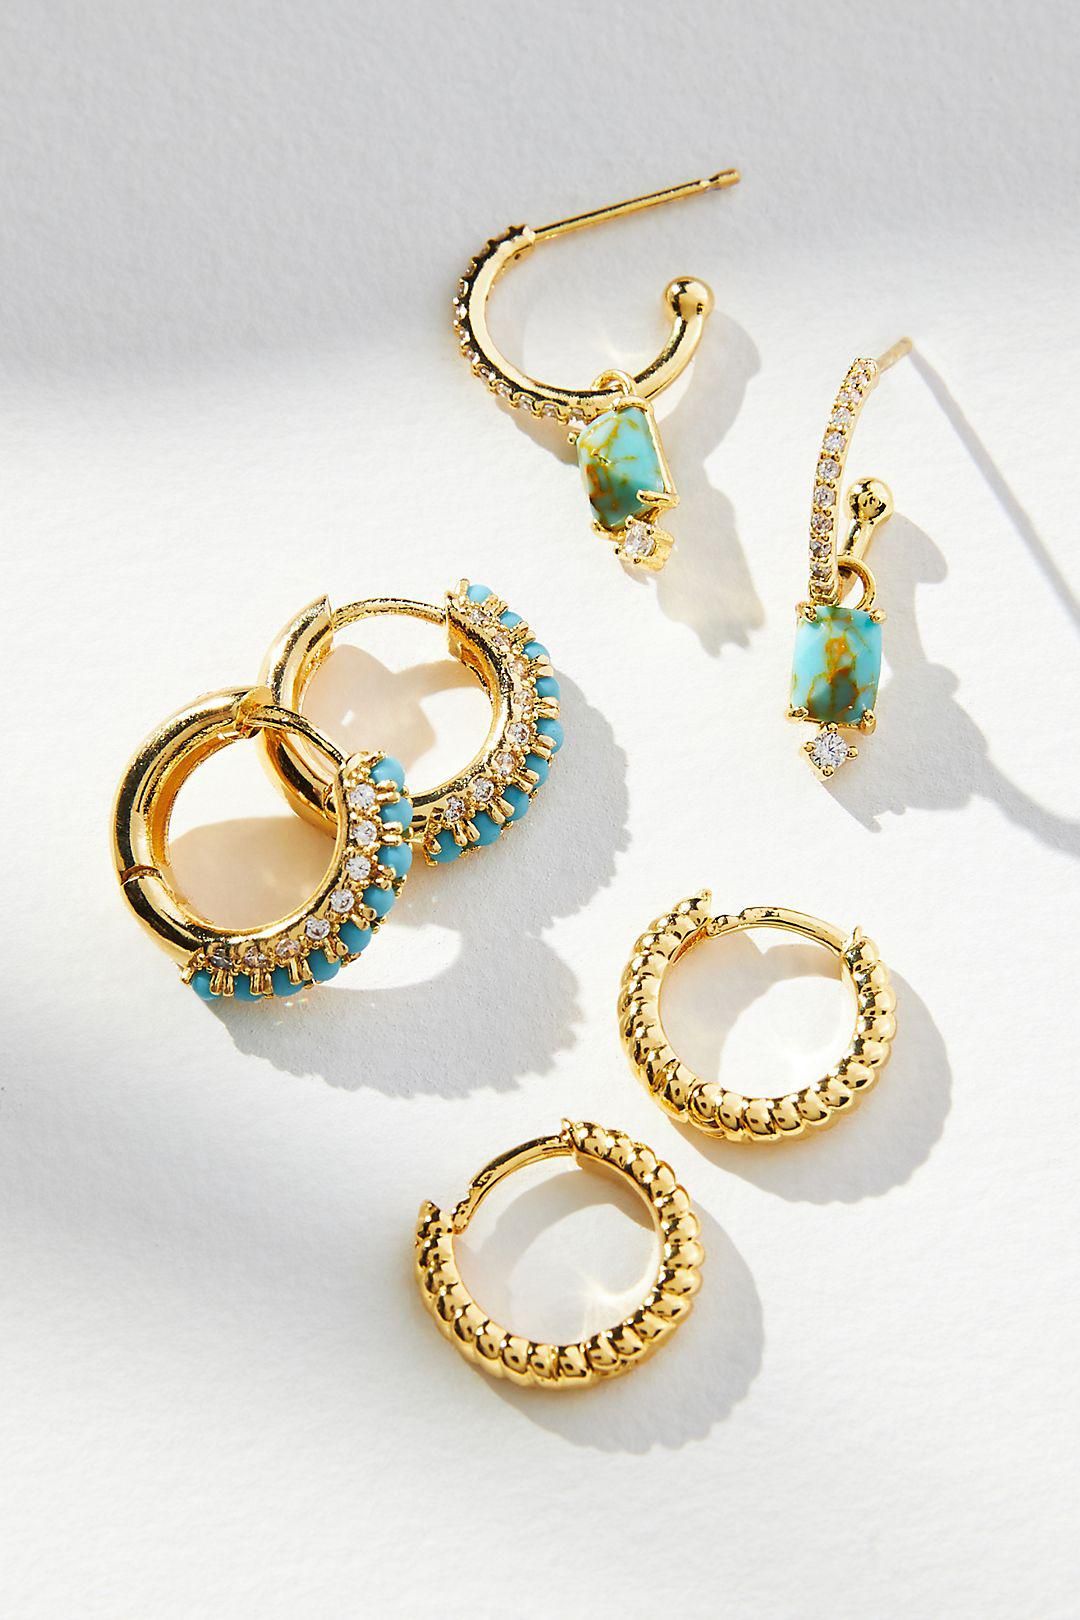 How To Get An Earscape With Stacked Earrings - Brit + Co